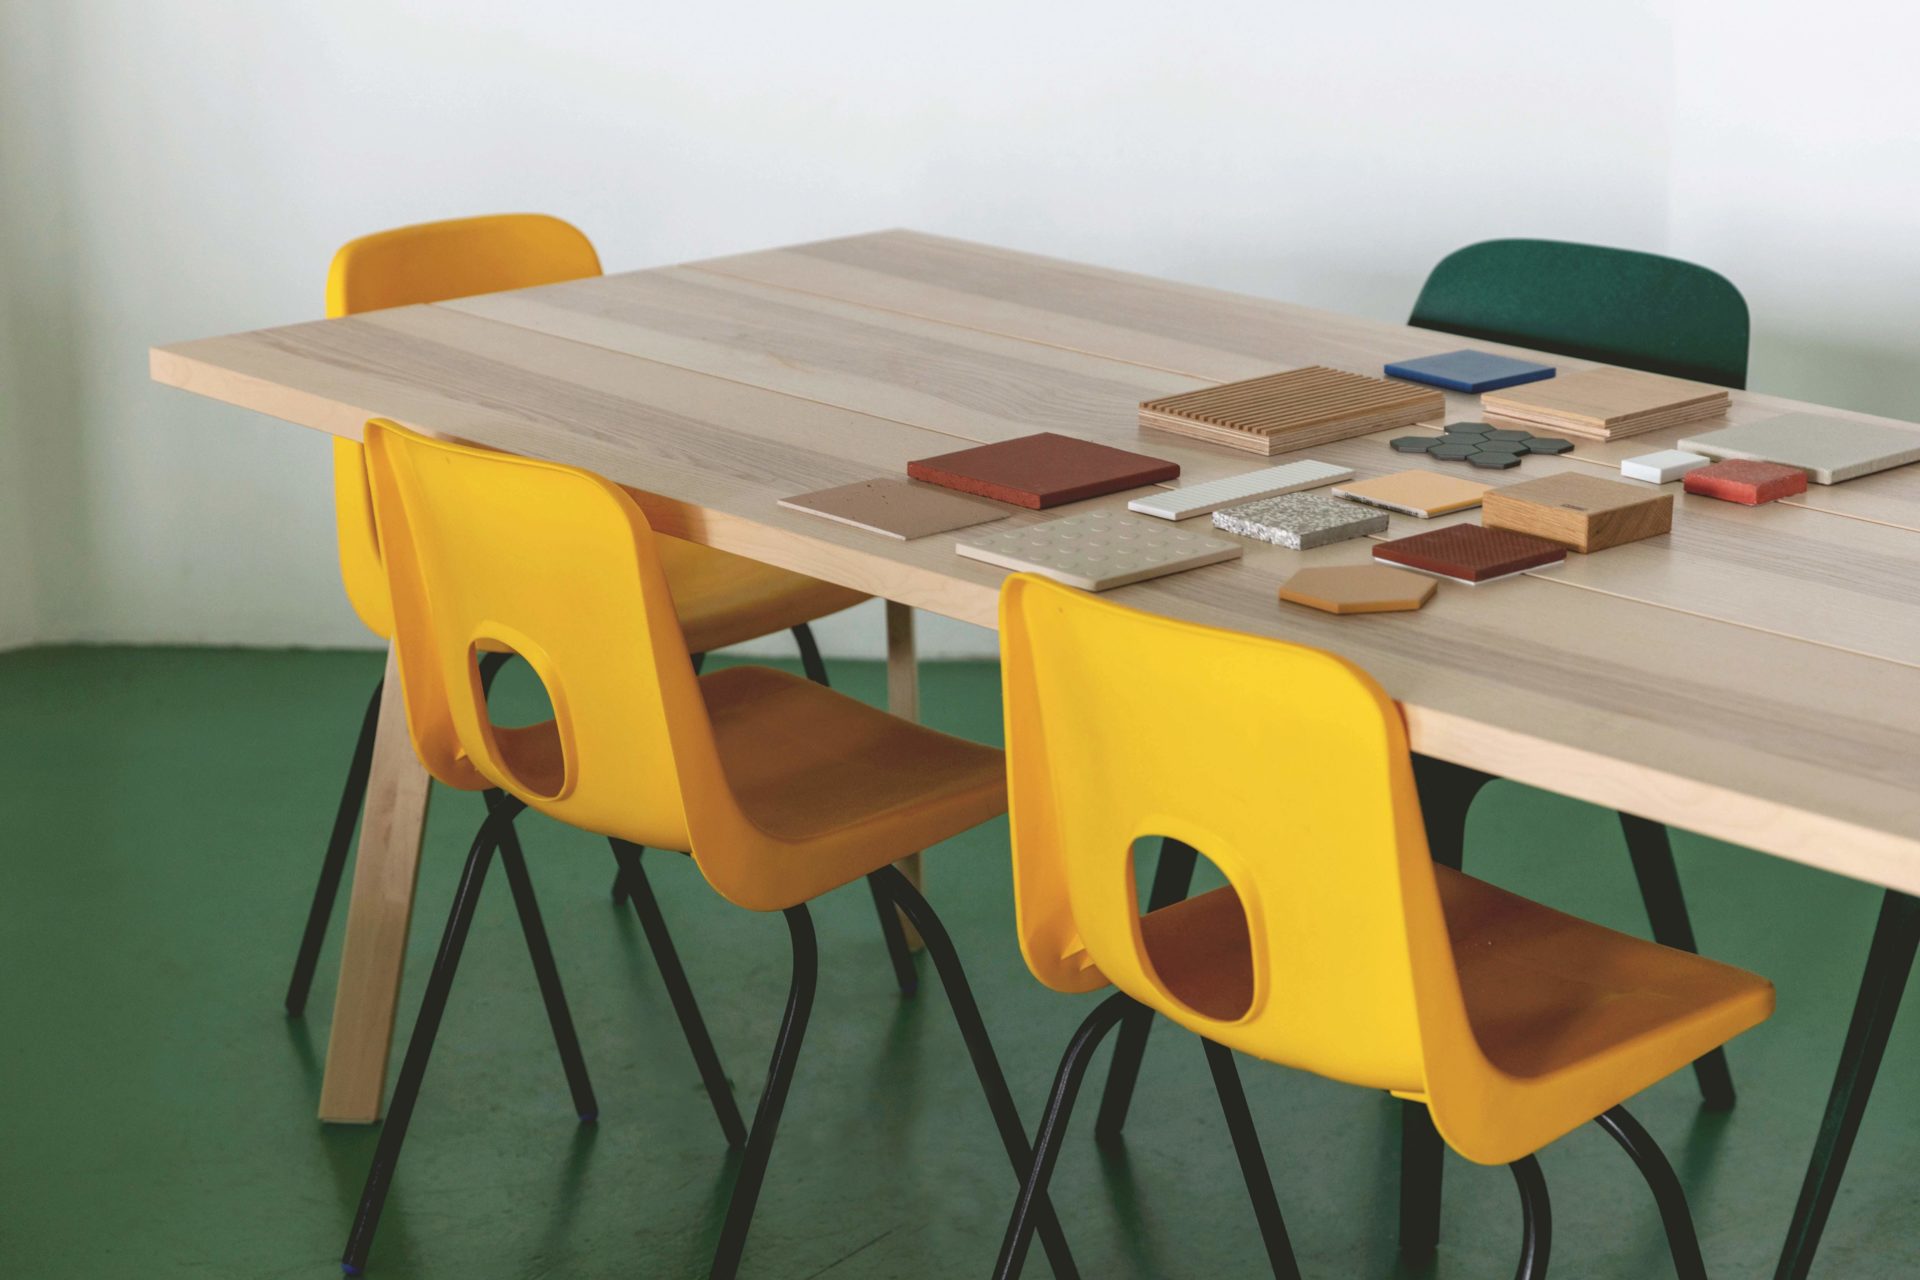 Emil Eve Architects Studio wooden meeting table with yellow chairs